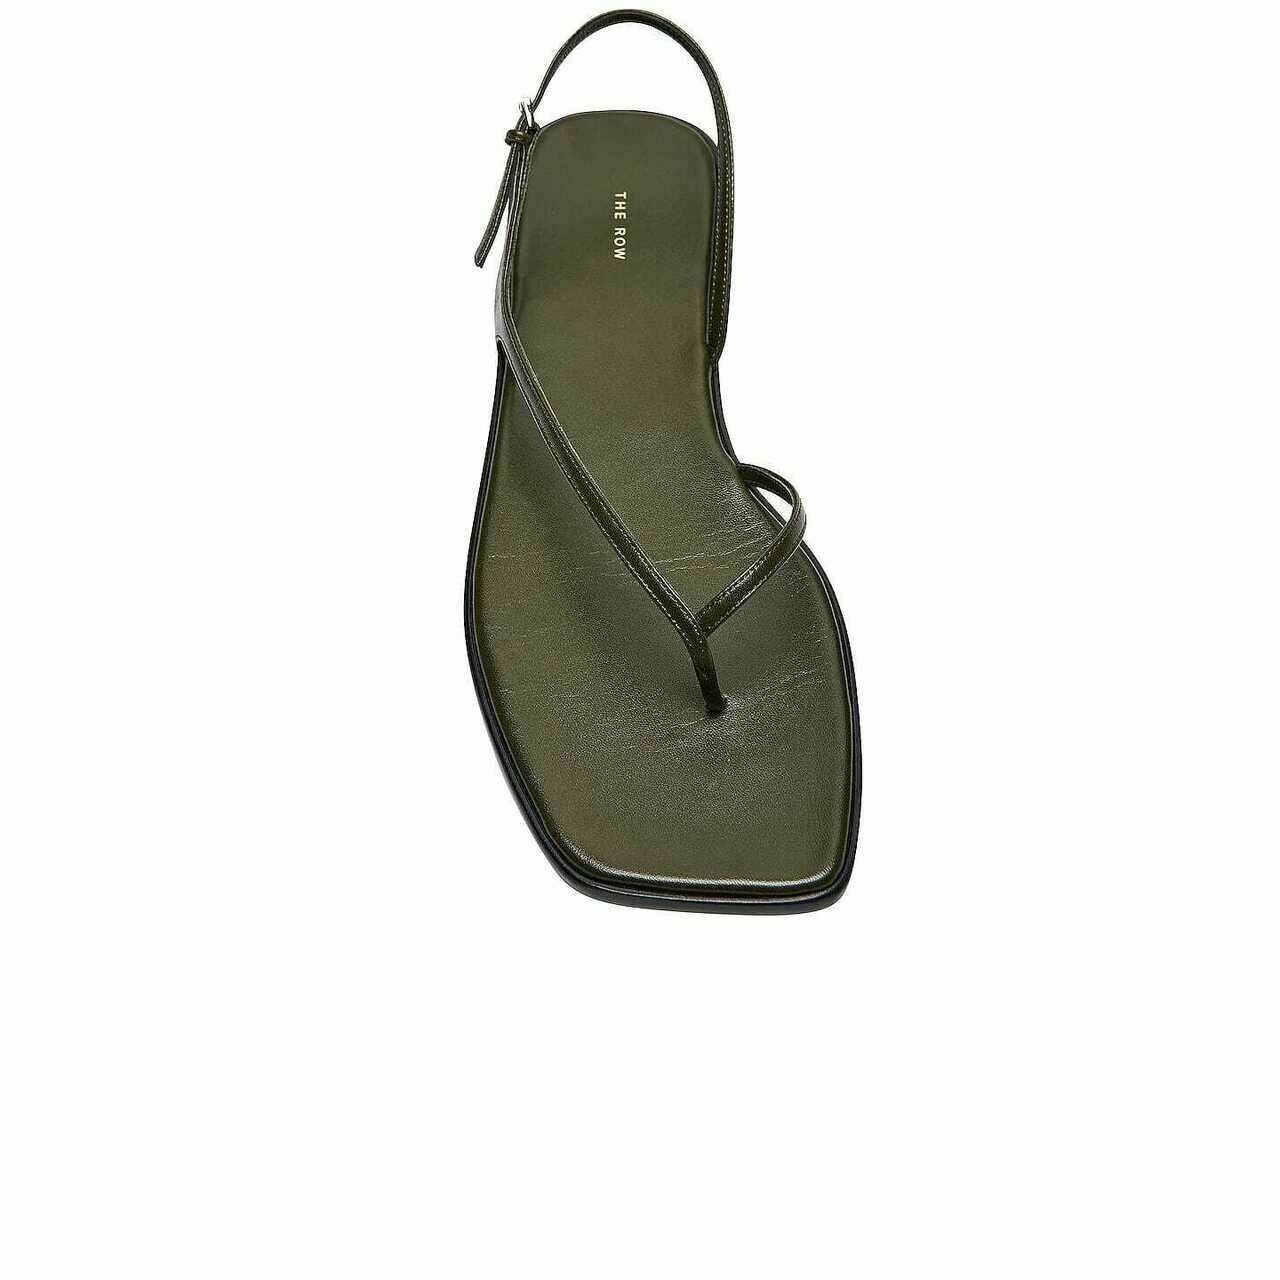 The Row Olive Sandals